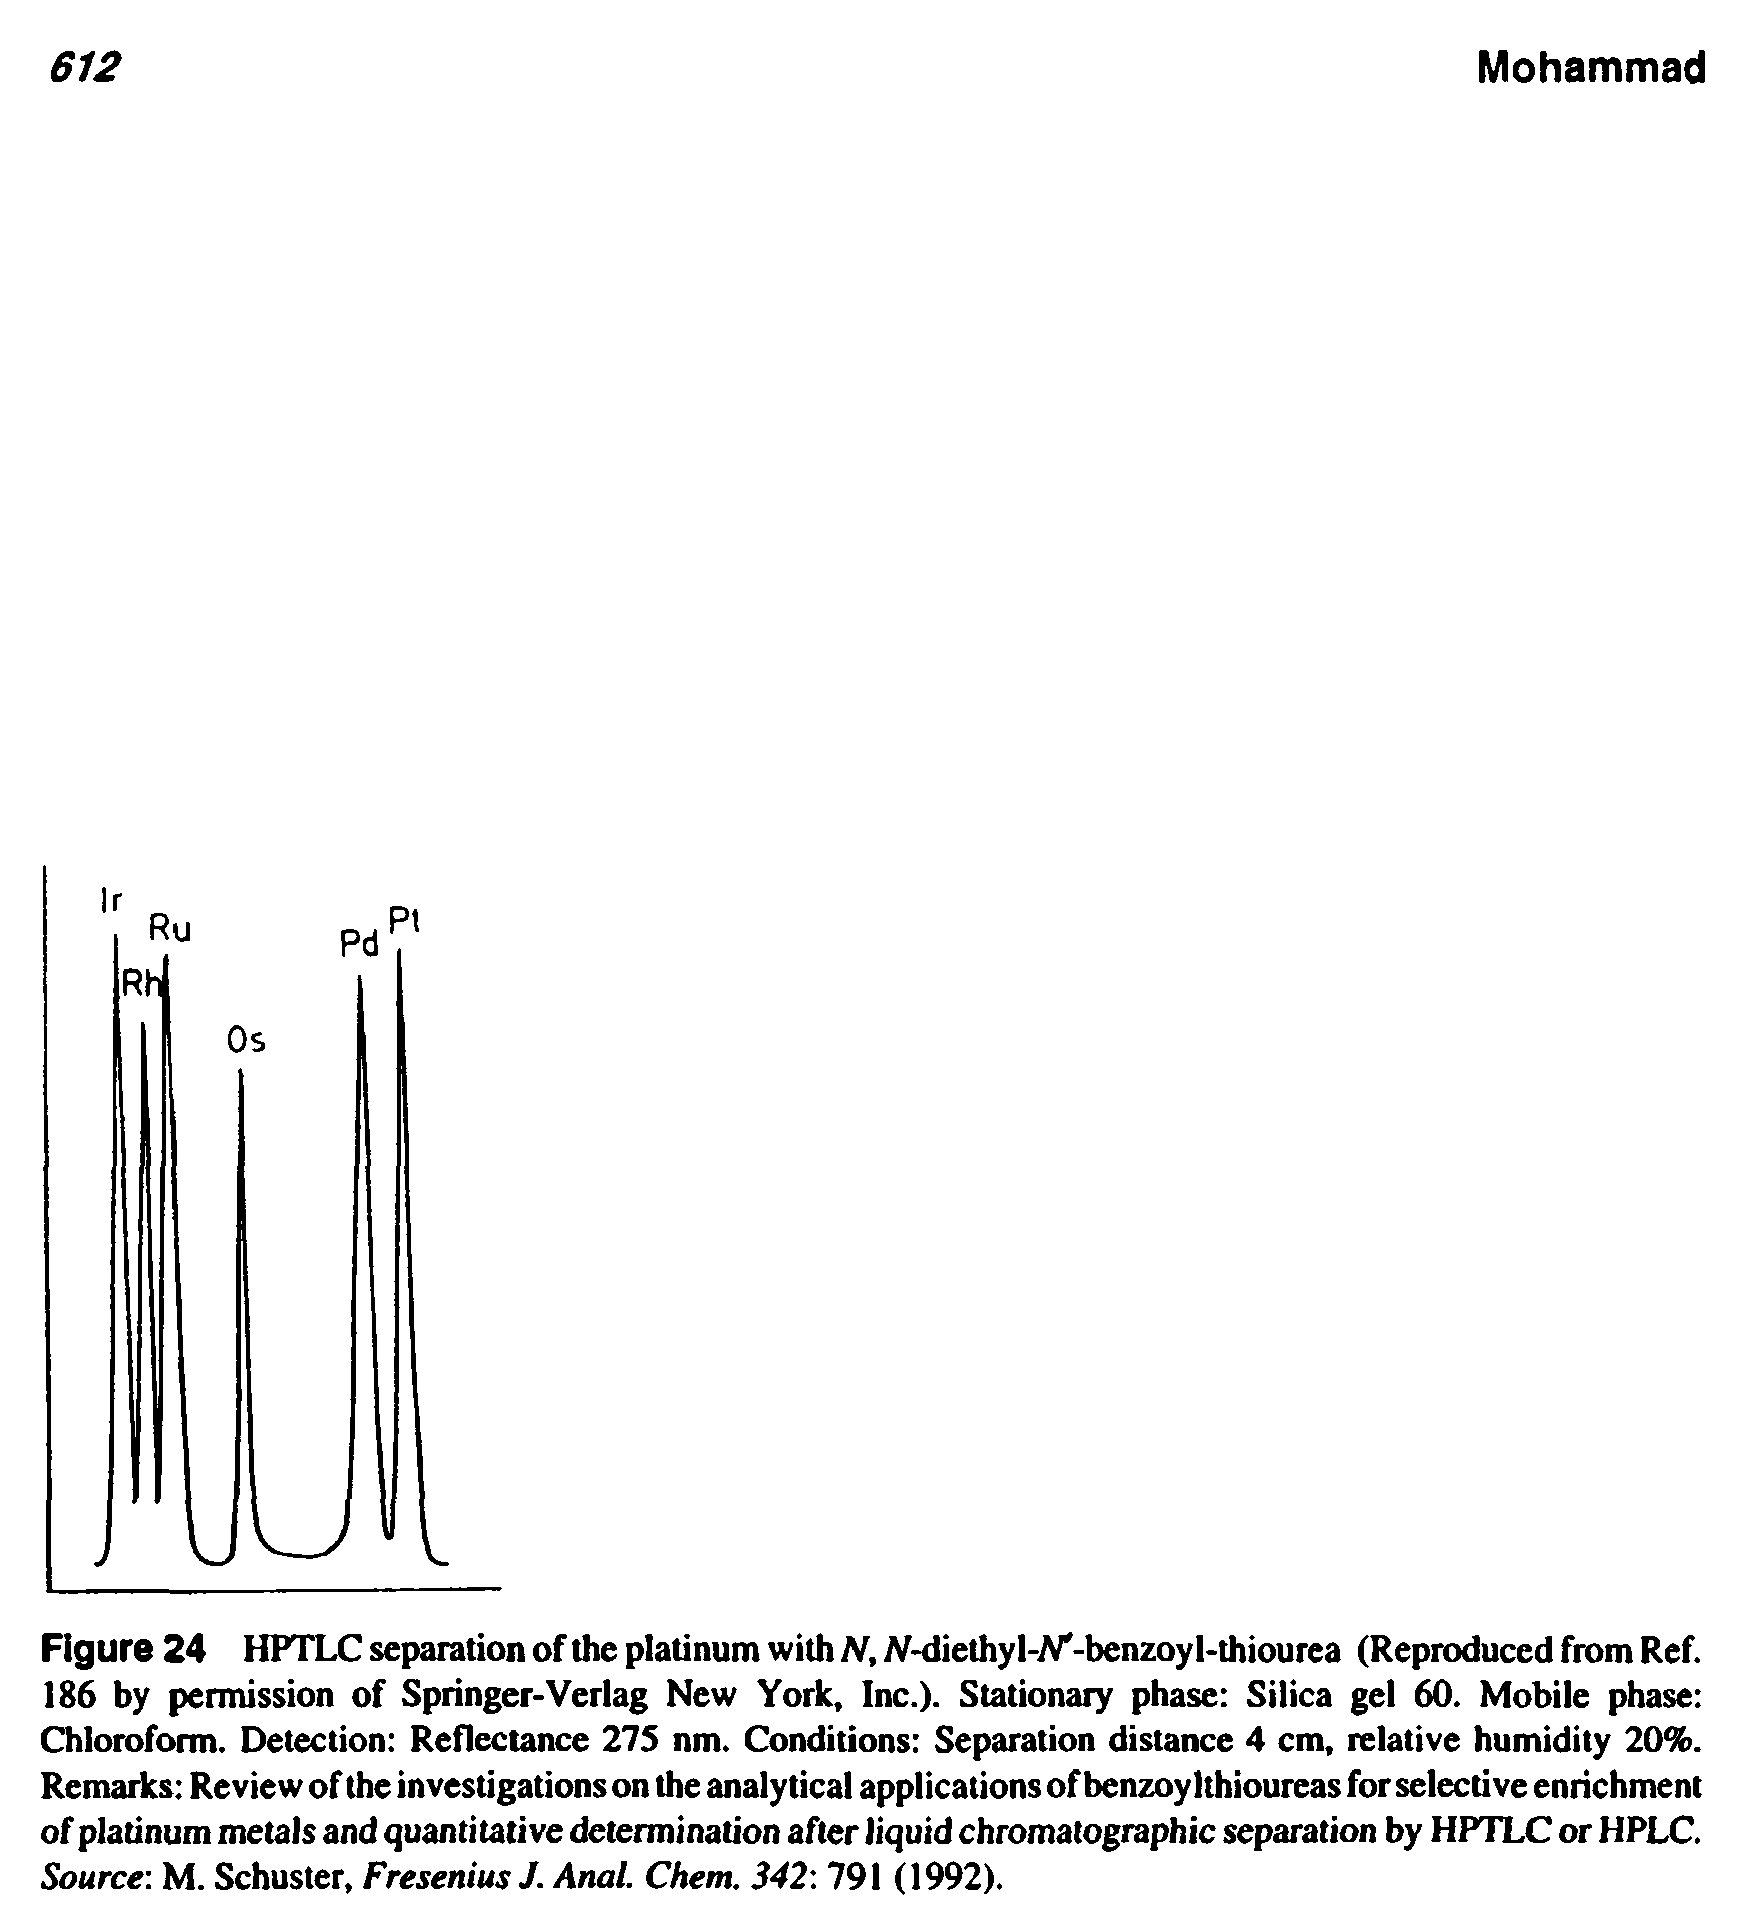 Figure 24 HPTLC separation of the platinum with N, Af-diethyl-W -benzoyl-thiouiea (Reproduced from Ref. 186 by permission of Springer-Verlag New York, Inc.). Stationary phase Silica gel 60. Mobile phase Chloroform. Detection Reflectance 275 nm. Conditions Separation distance 4 cm. relative humidity 20%. Remarks Review of the investigations on the analytical applications of benzoy Ithioureas for selective enrichment of platinum metals and quantitative determination after liquid chromatographic separation by HPTLC or HPLC. Source M. Schuster, FreseniusJ. Anal. Chem. 342 791 (1992).